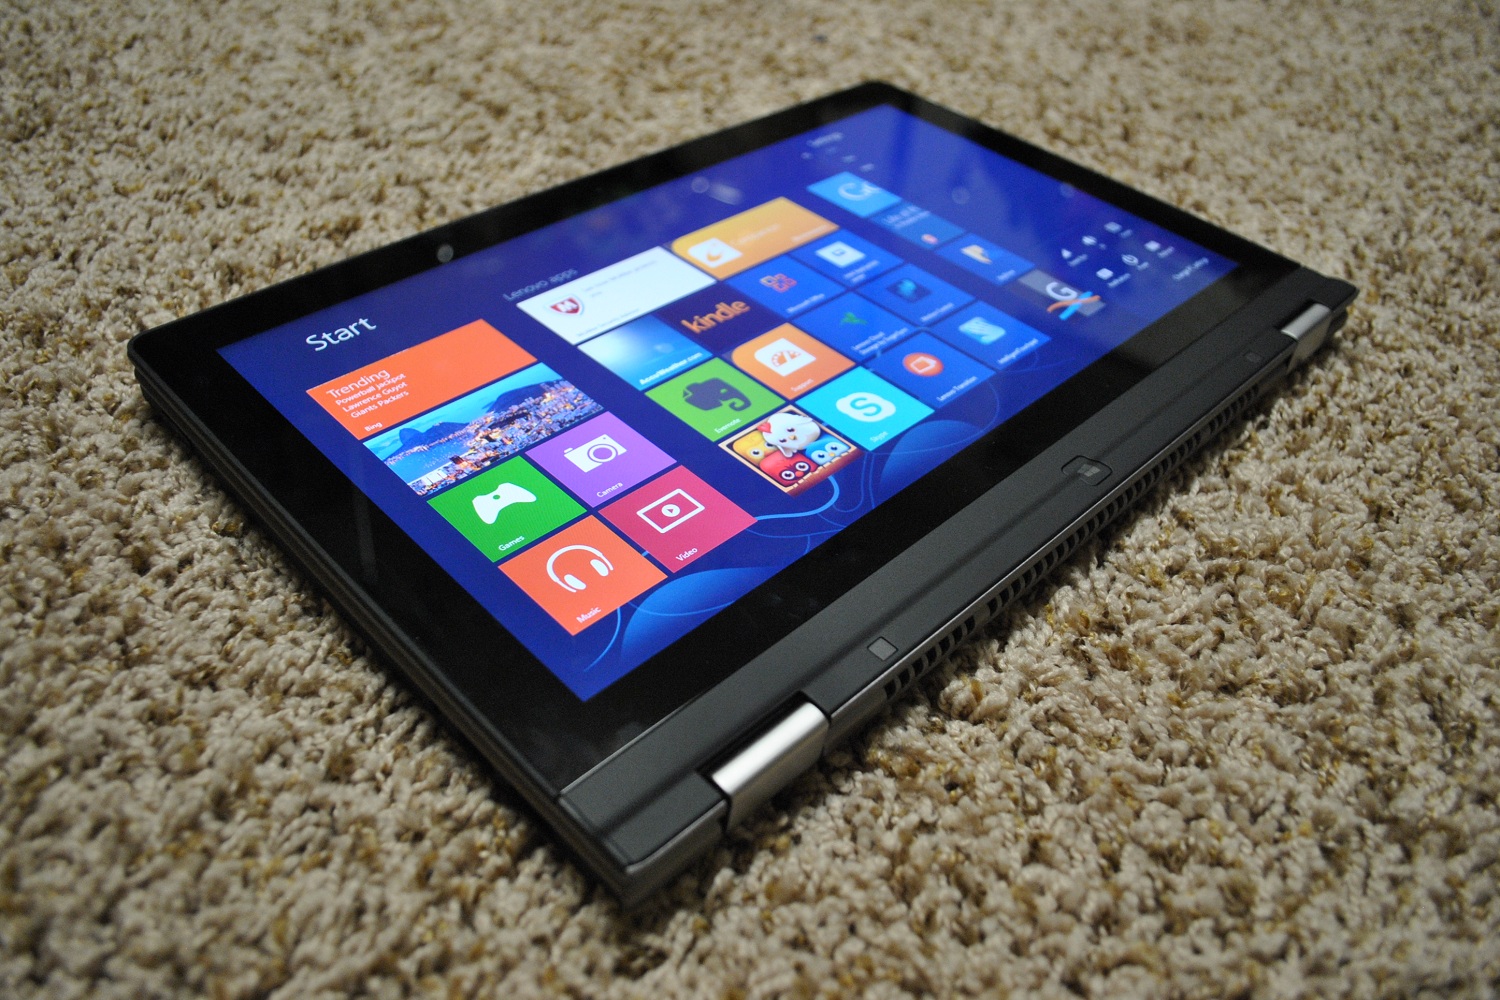 Lenovo IdeaPad Yoga 13 Review: A Great Windows 8 Laptop with a 